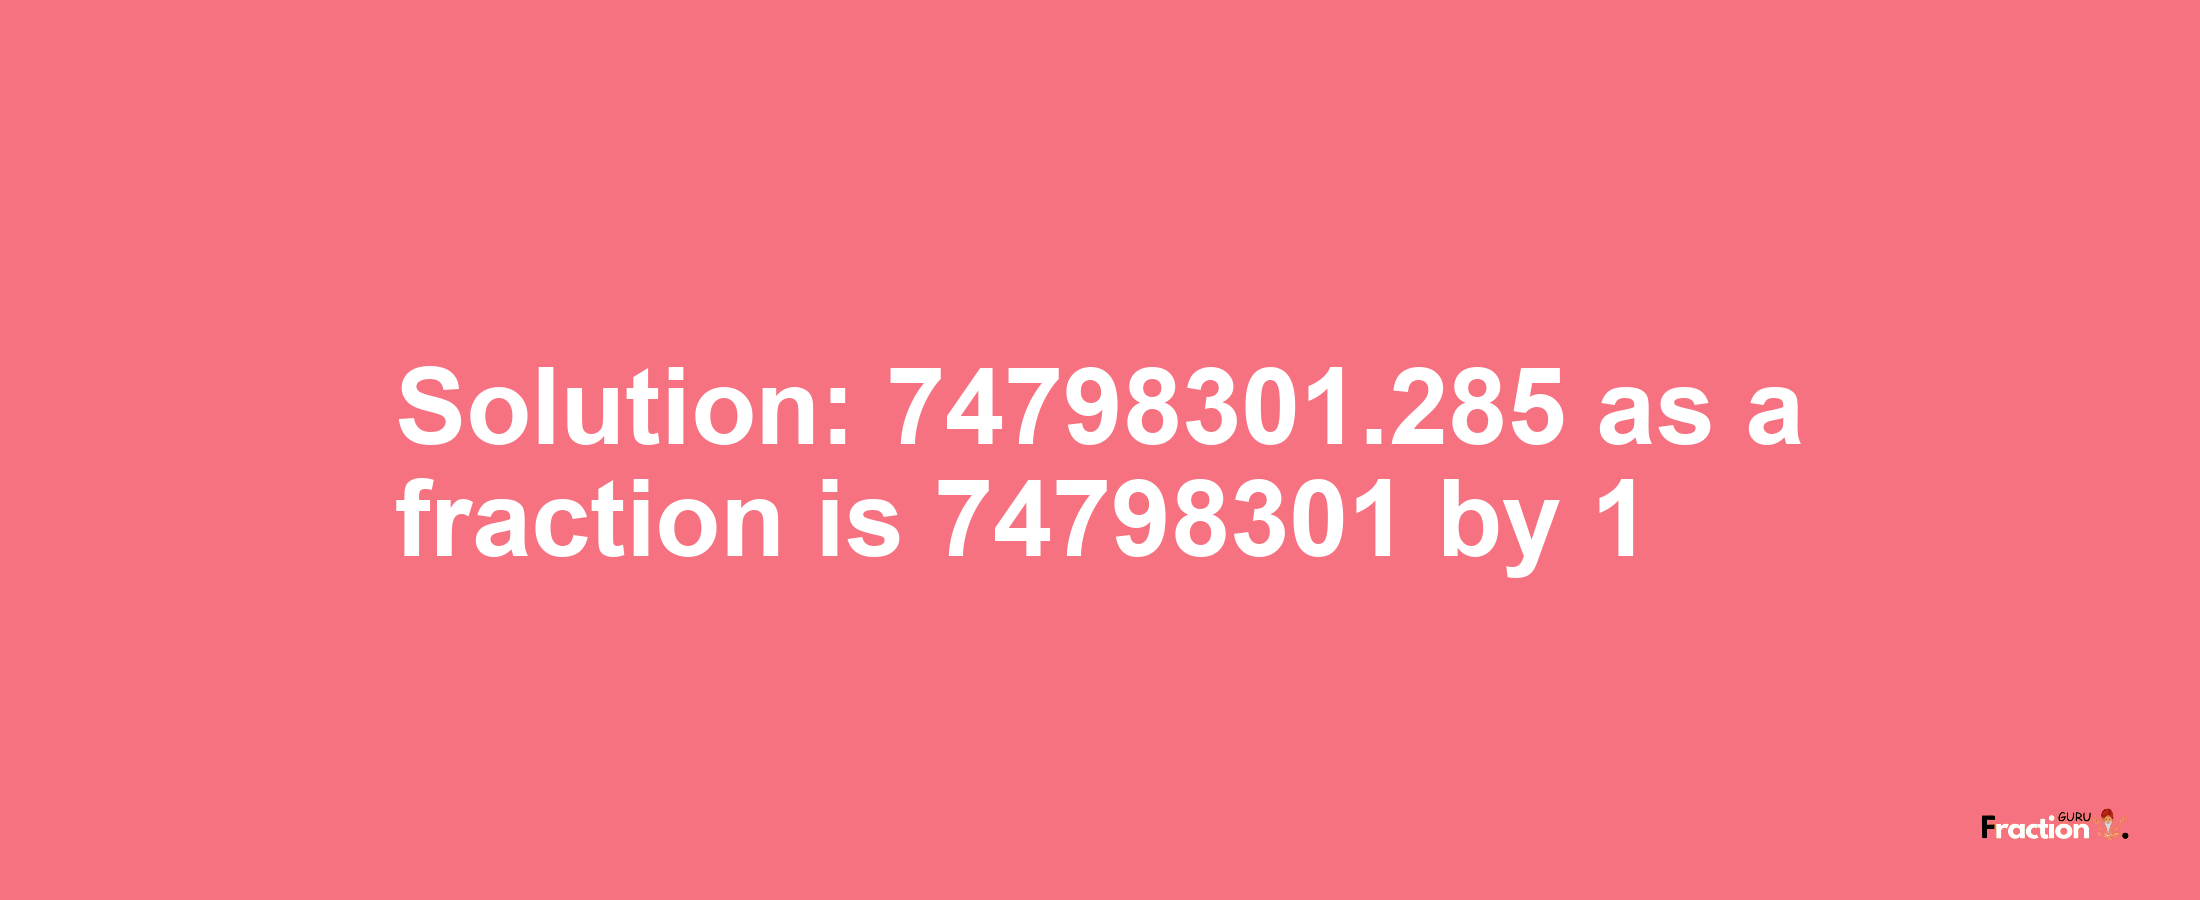 Solution:74798301.285 as a fraction is 74798301/1